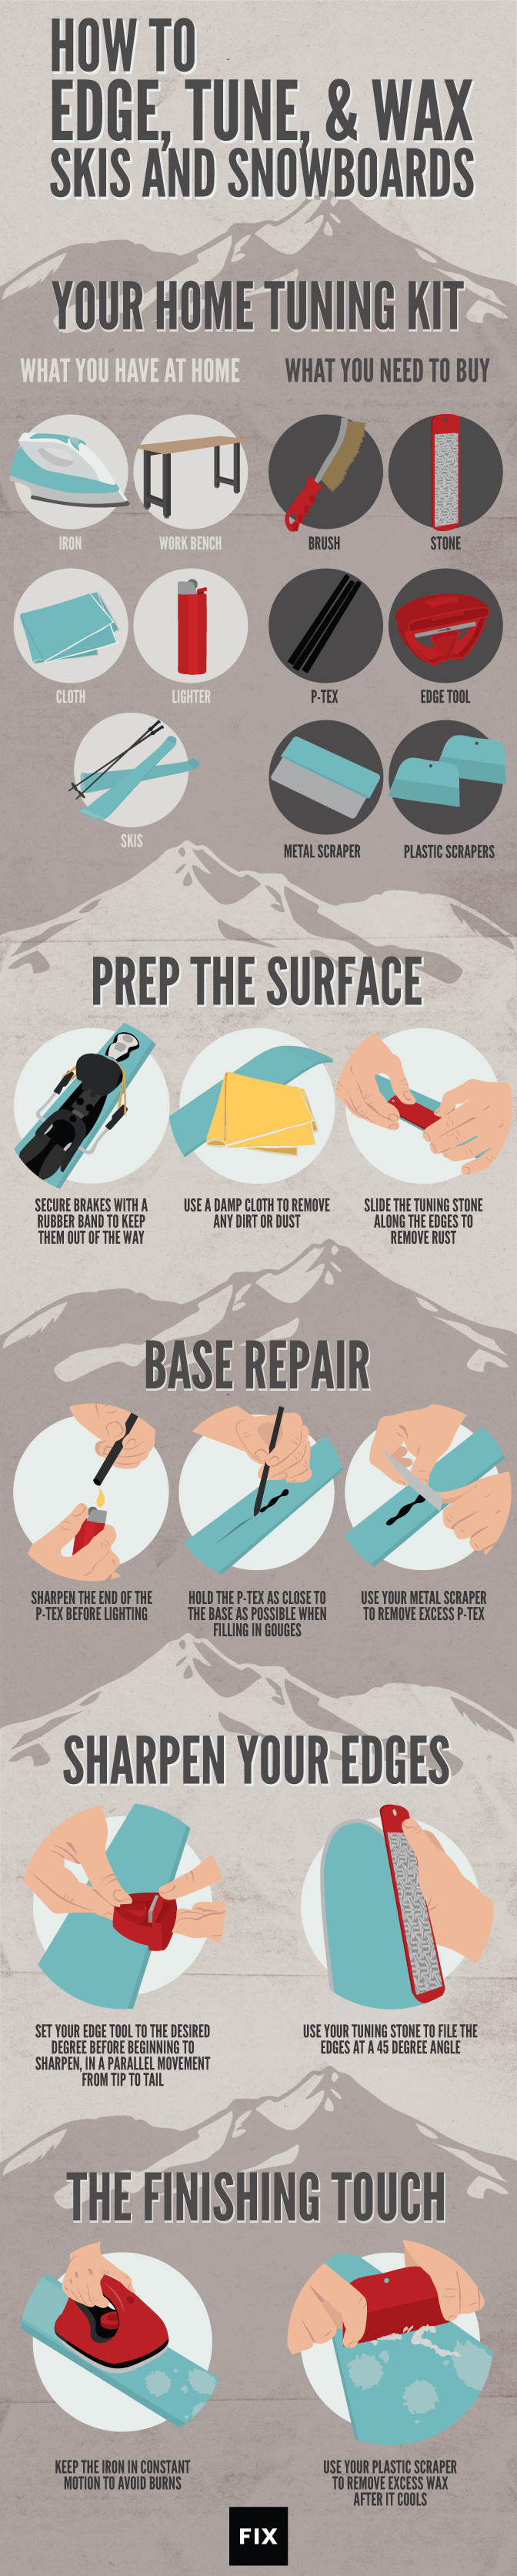 How to Wax a Snowboard: the easiest way!